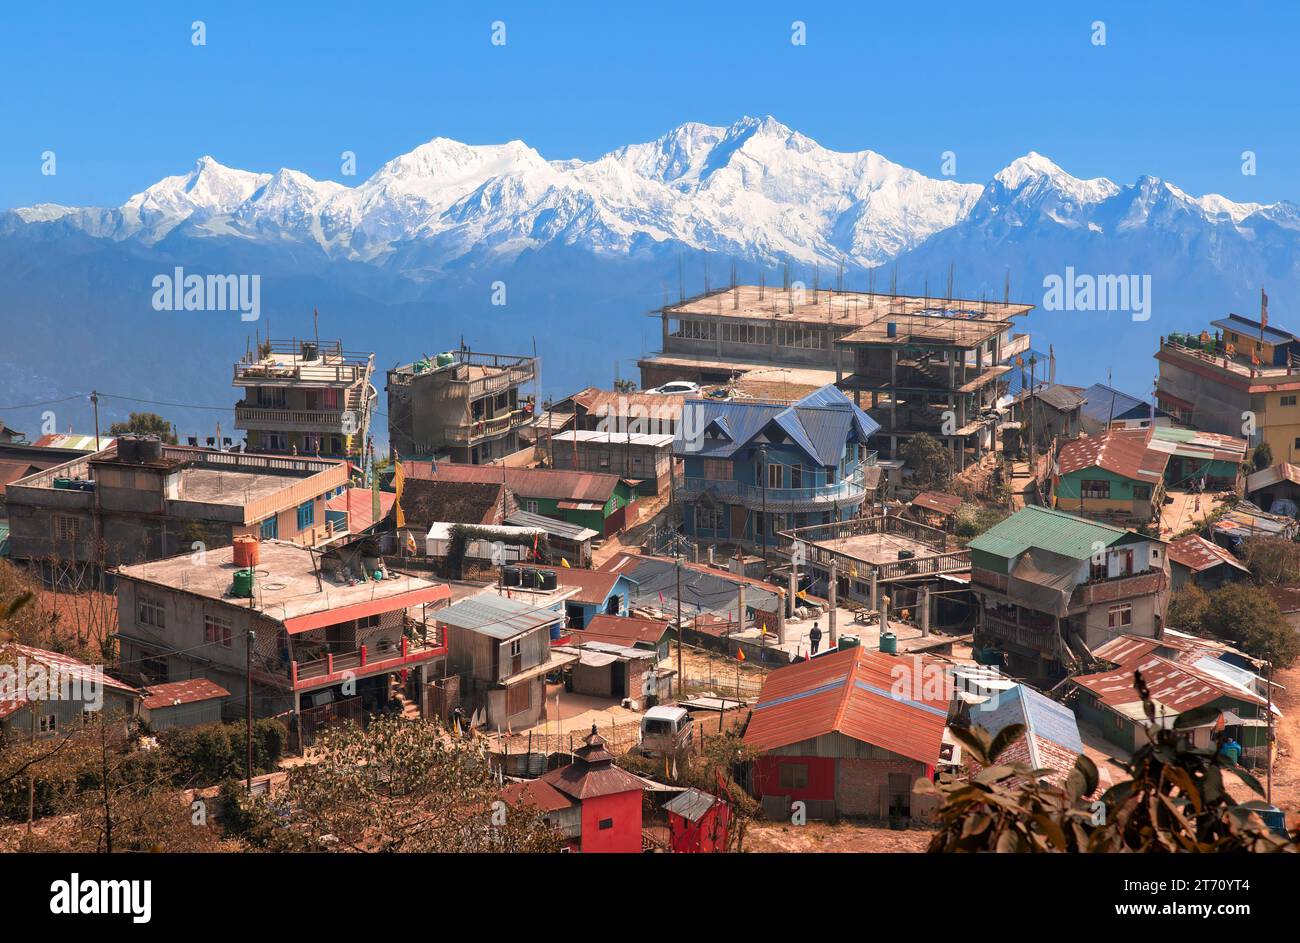 Scenic mountain village town near Tinchuley hill station with view of the Kanchenjunga Himalaya range at Darjeeling, India Stock Photo